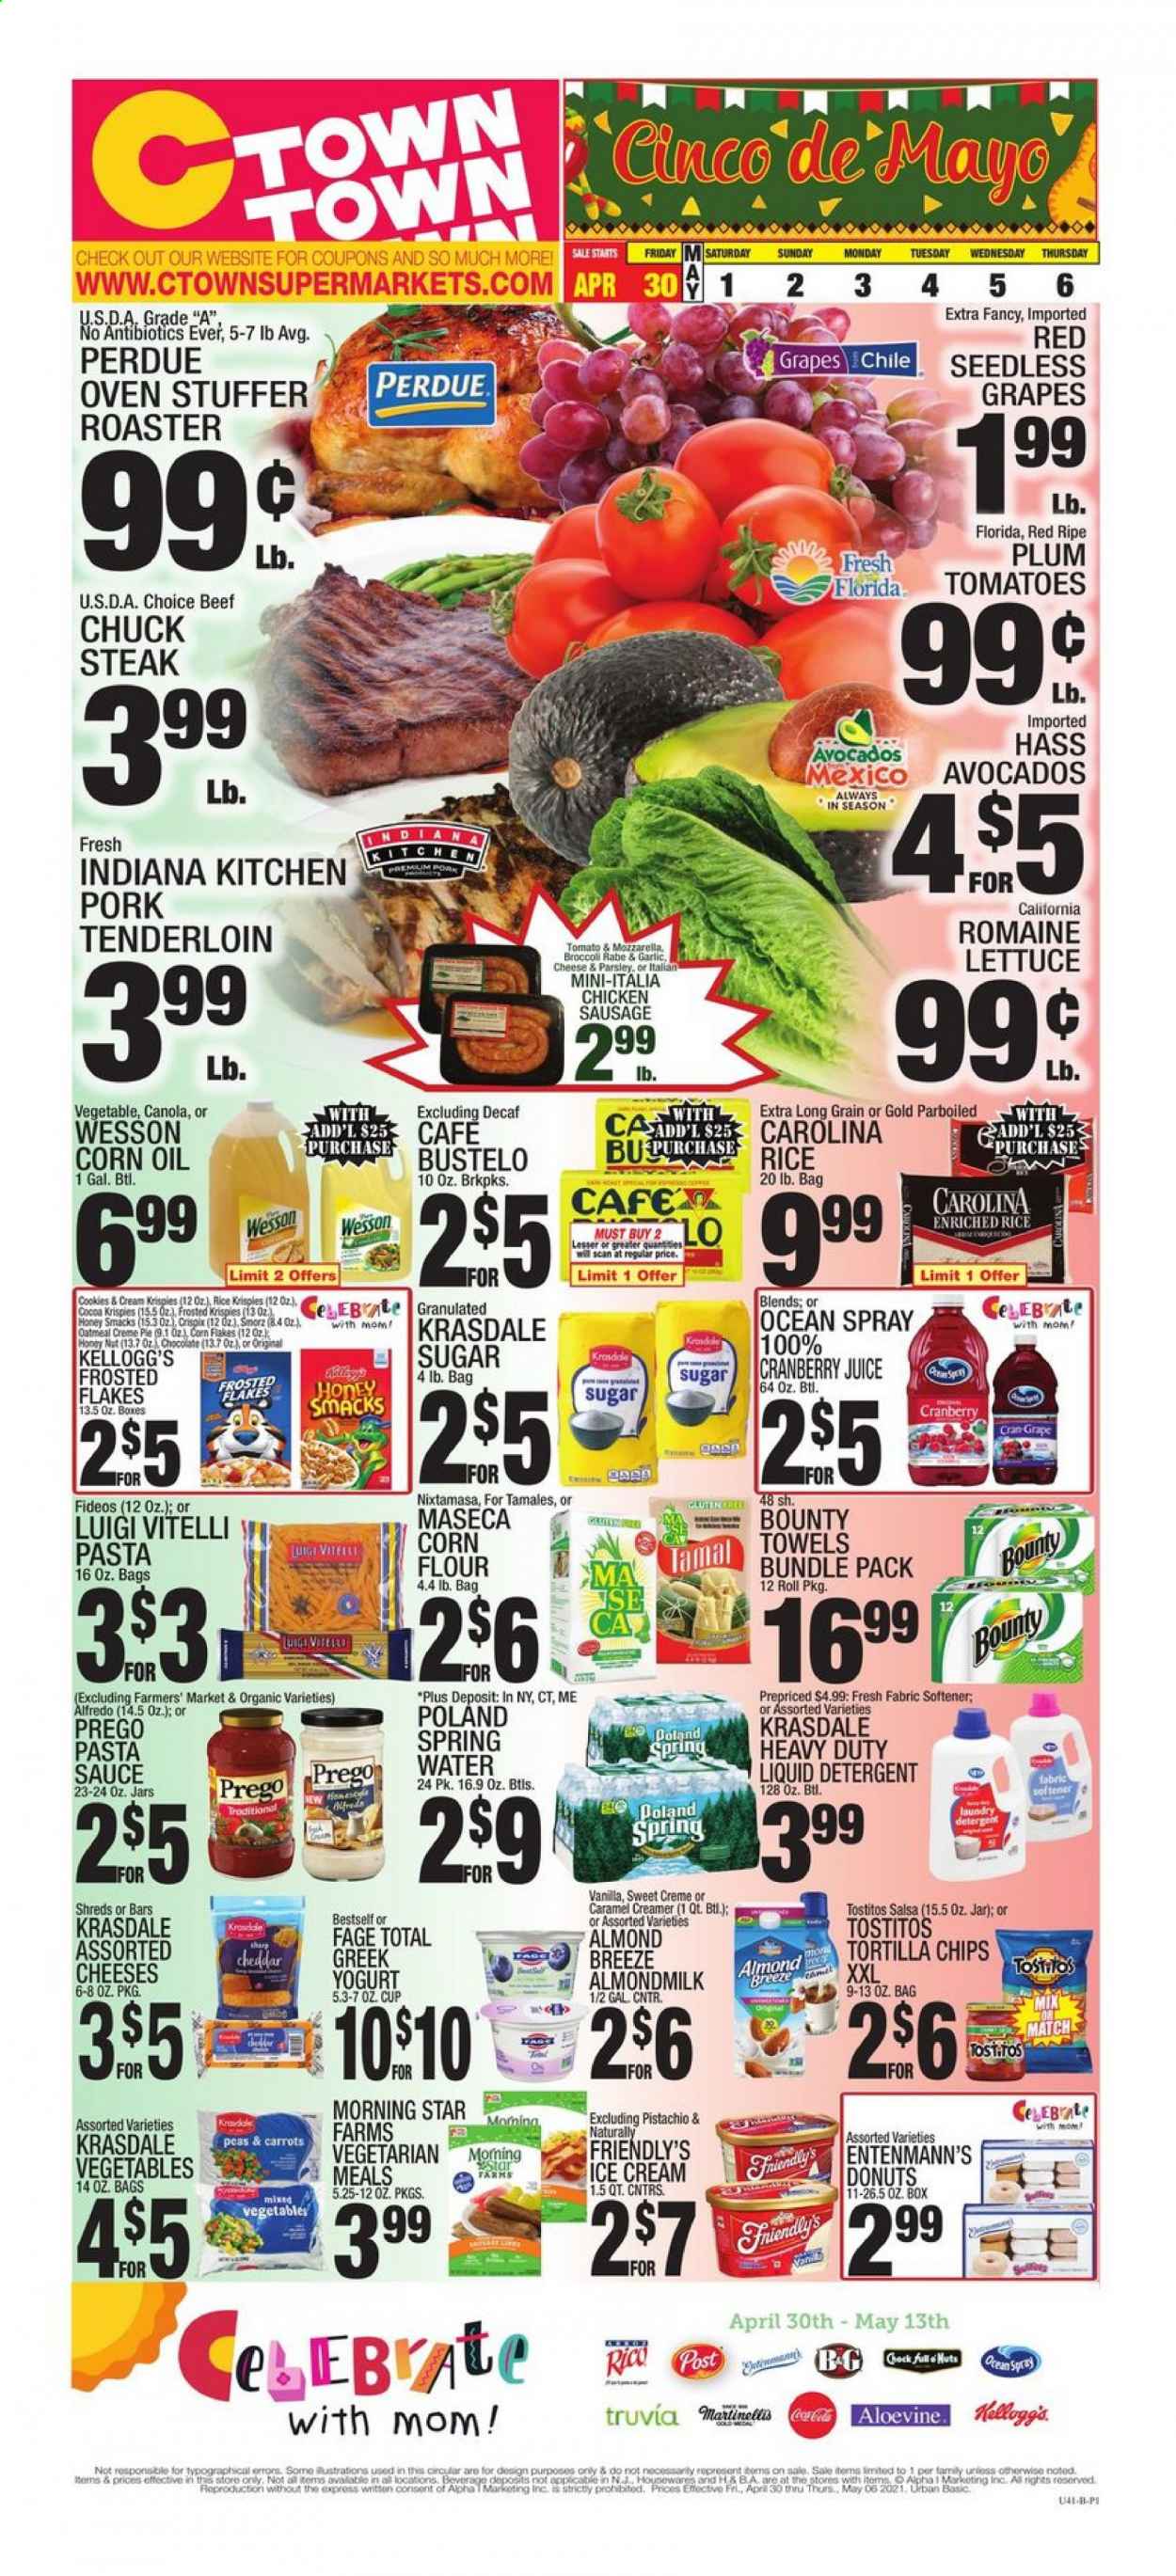 thumbnail - C-Town Flyer - 04/30/2021 - 05/06/2021 - Sales products - seedless grapes, pie, donut, Entenmann's, broccoli, carrots, tomatoes, parsley, lettuce, avocado, pasta sauce, Perdue®, sausage, chicken sausage, mozzarella, greek yoghurt, yoghurt, almond milk, Almond Breeze, creamer, ice cream, Friendly's Ice Cream, mixed vegetables, cookies, chocolate, Bounty, Kellogg's, tortilla chips, chips, Tostitos, cocoa, sugar, oatmeal, corn flour, corn flakes, Frosted Flakes, rice, parboiled rice, salsa, corn oil, cranberry juice, juice, Cran-Grape, spring water, beef meat, steak, chuck steak, pork meat, pork tenderloin. Page 1.